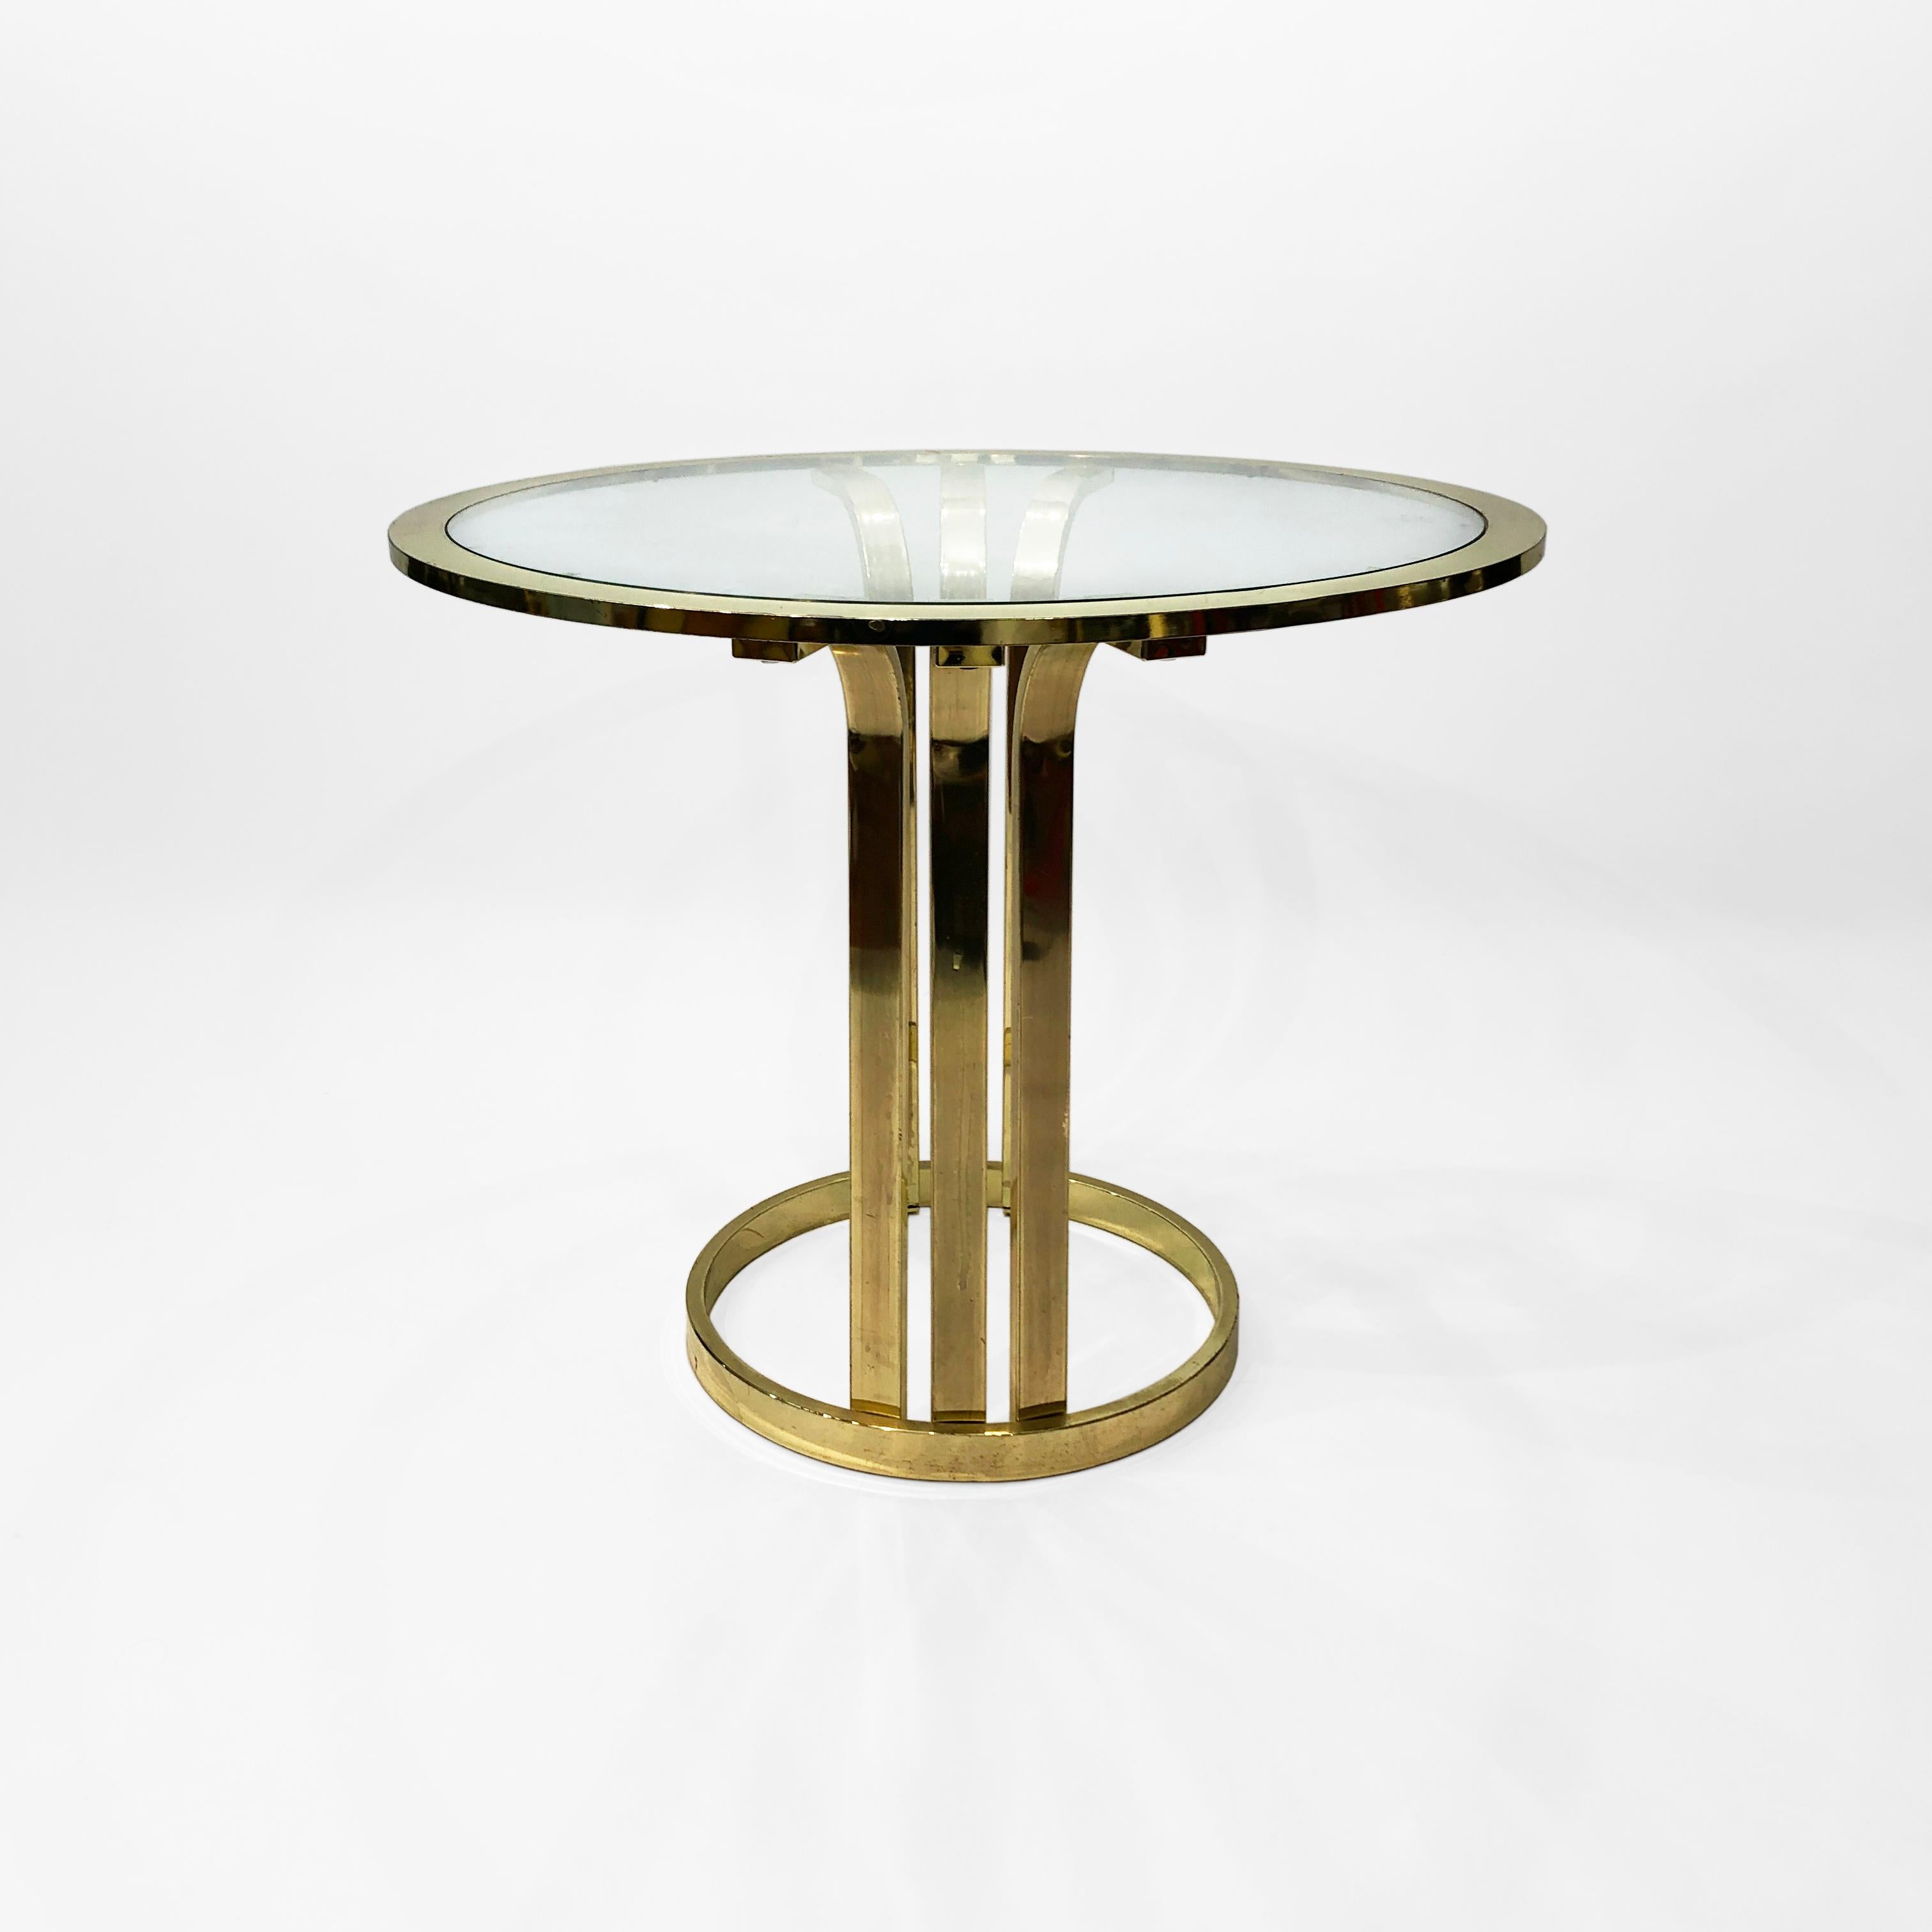 Late 20th Century Brass Plated Art Deco Style Side Table 1970s Glamour Vintage Hollywood Regency For Sale